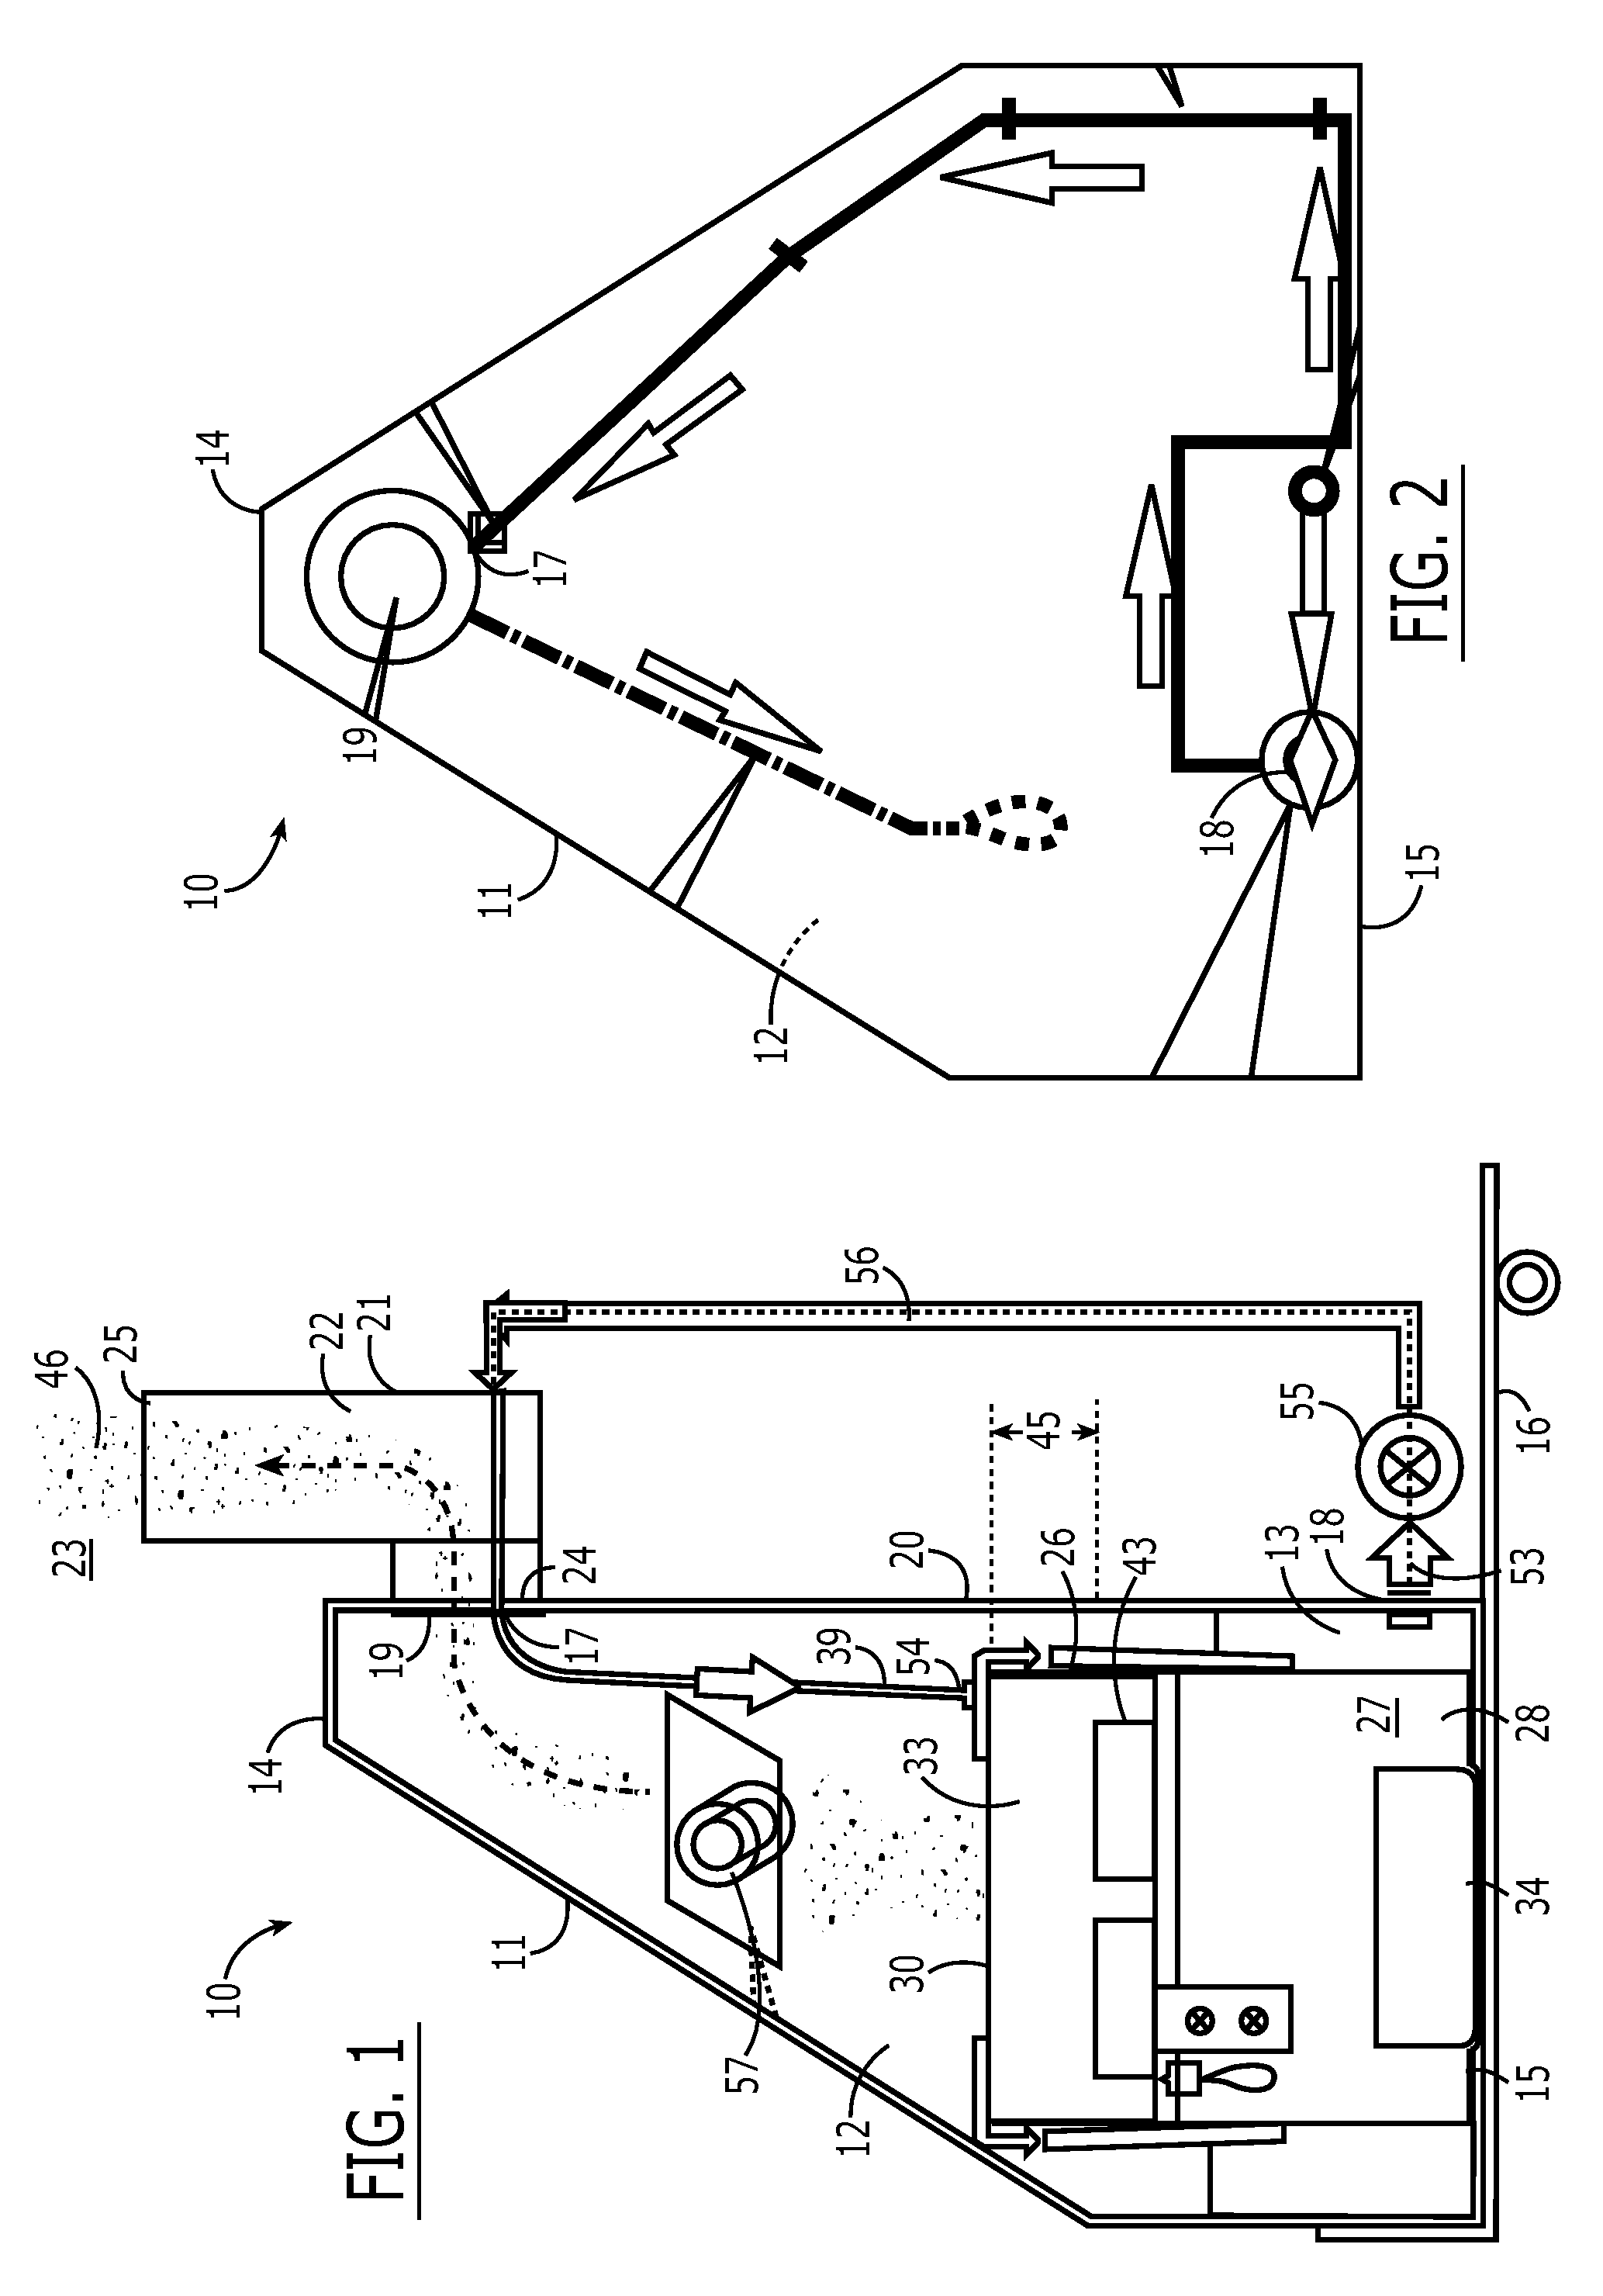 Ultrasonic Sanitation and Disinfecting Device and Associated Methods